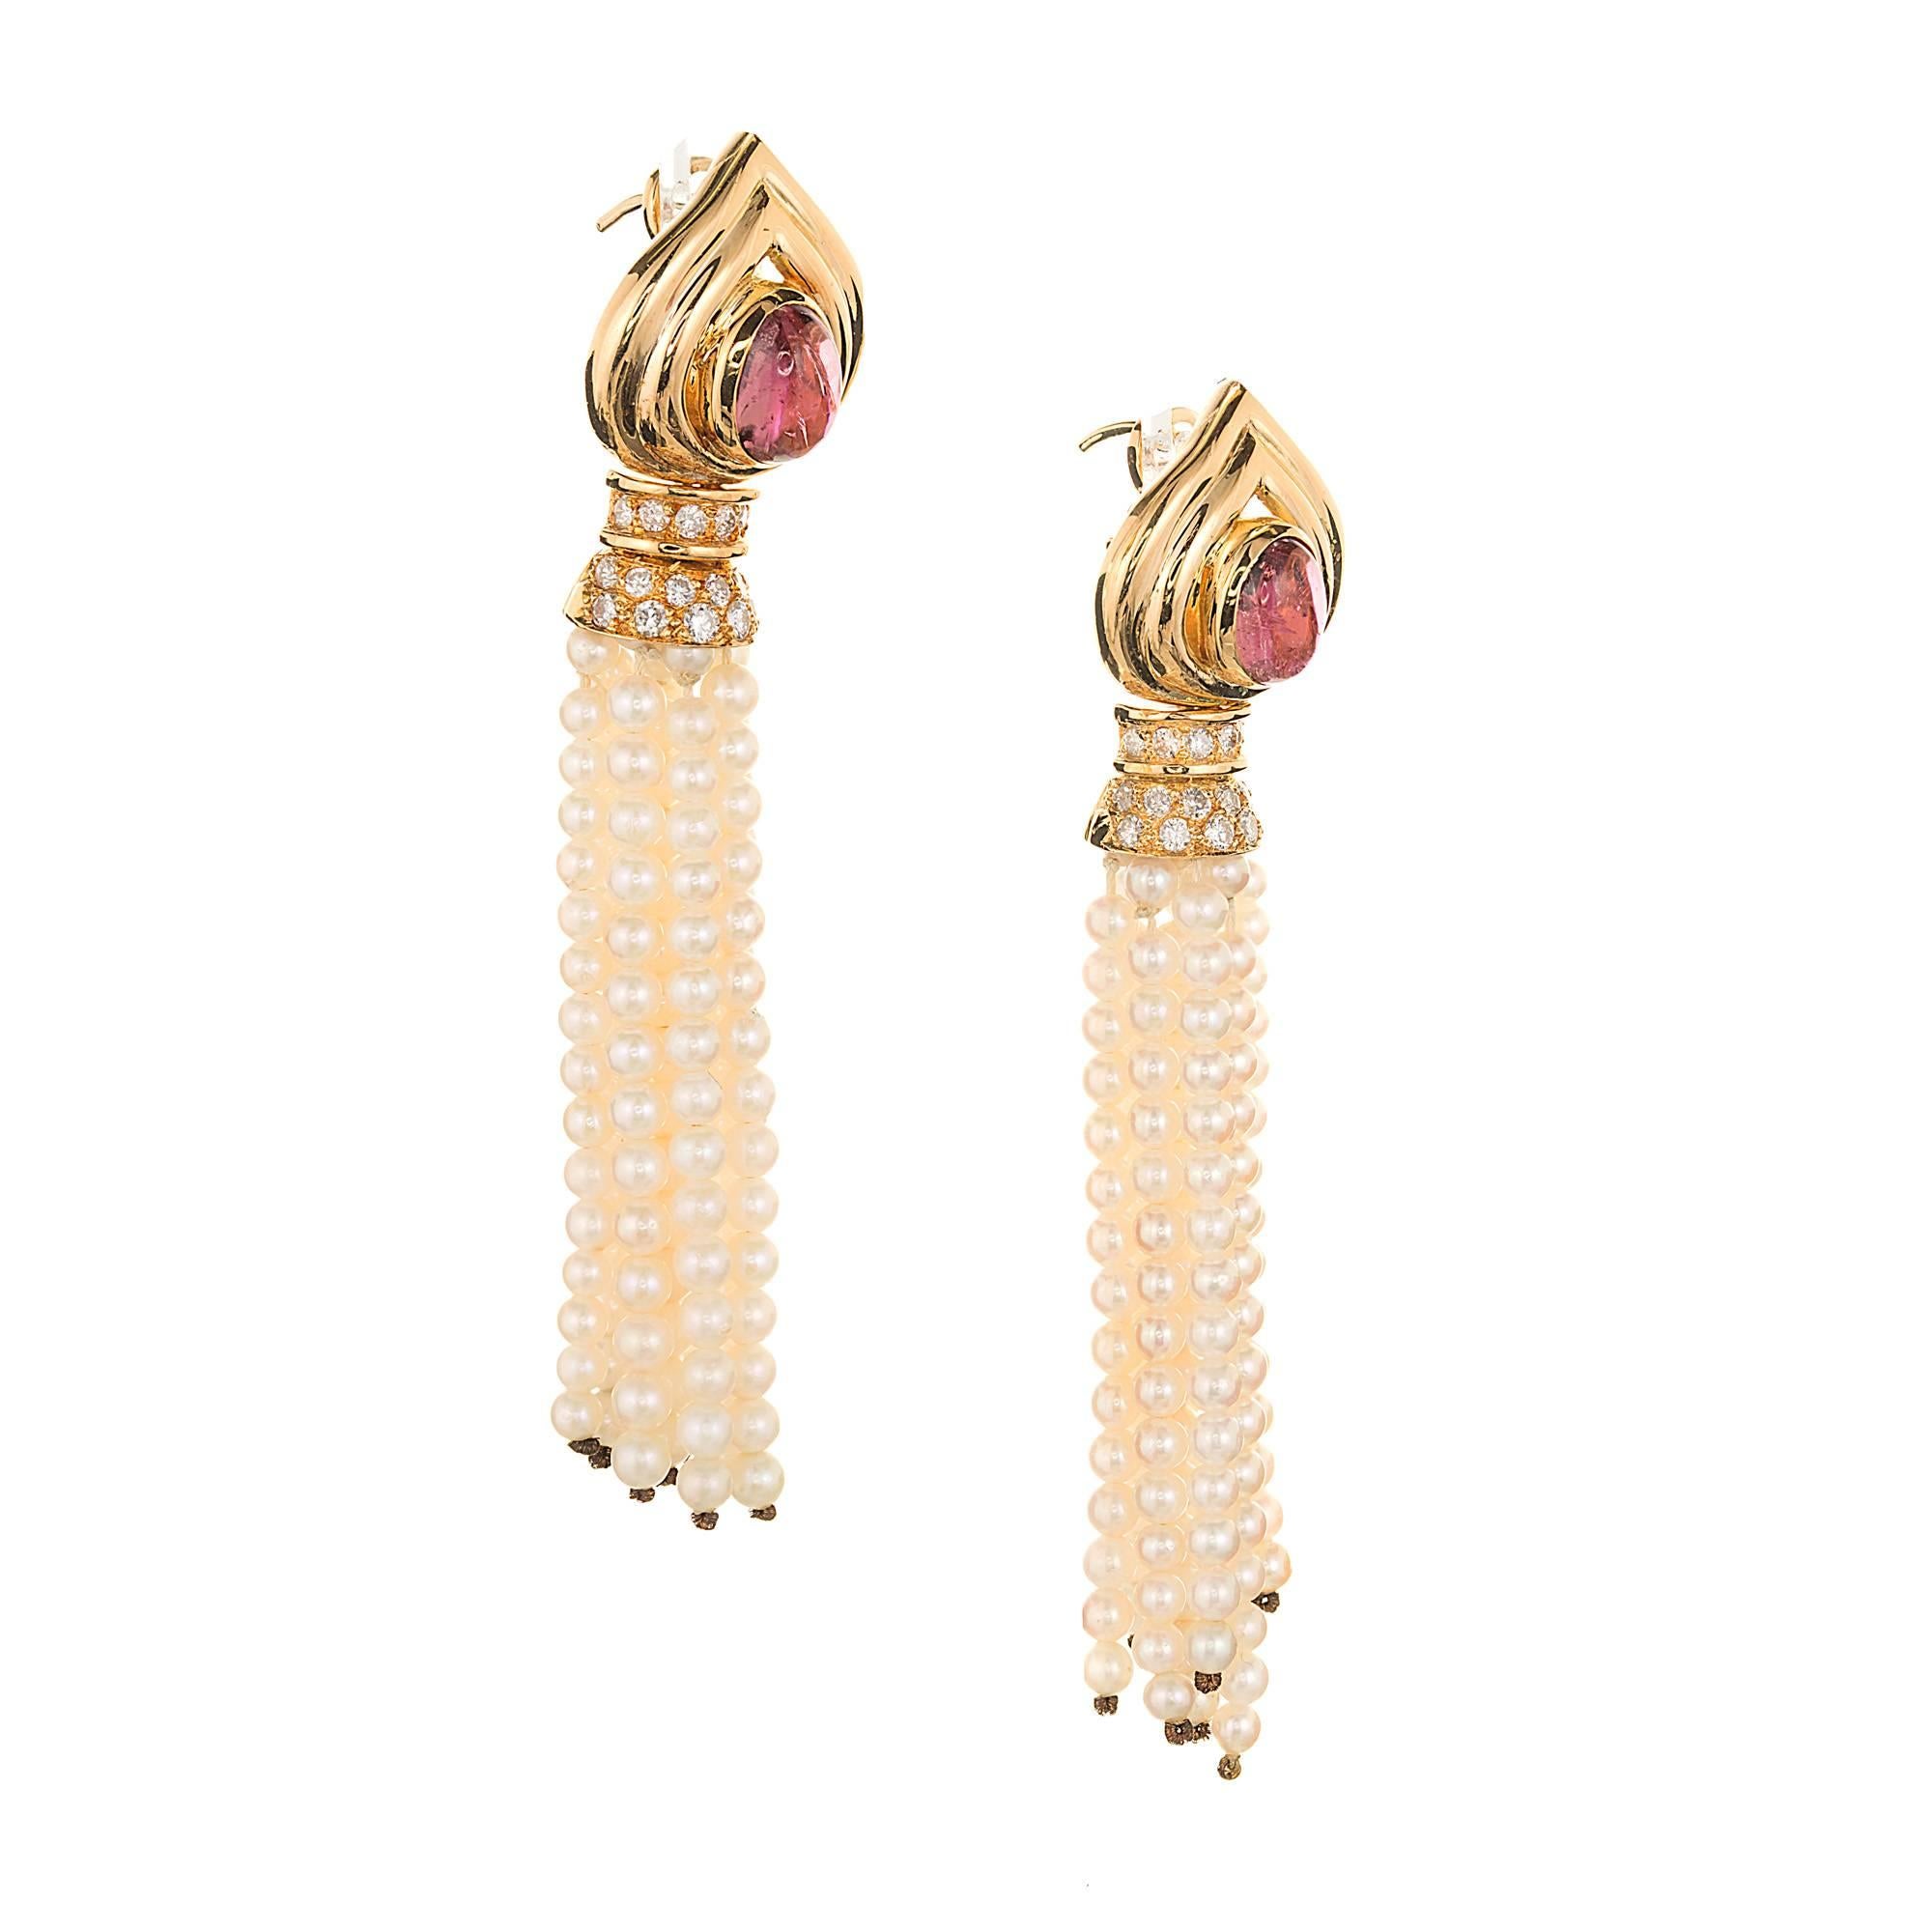 Stylish clip and post dangle earrings with pink Tourmaline tops, full cut diamonds and flowing cultured pearl dangle drop earrings. Circa 1960-1970.

2 oval cabochon pink tourmaline, approx. total weight 2.00cts, 8.5 x 6mm
38 round full cut